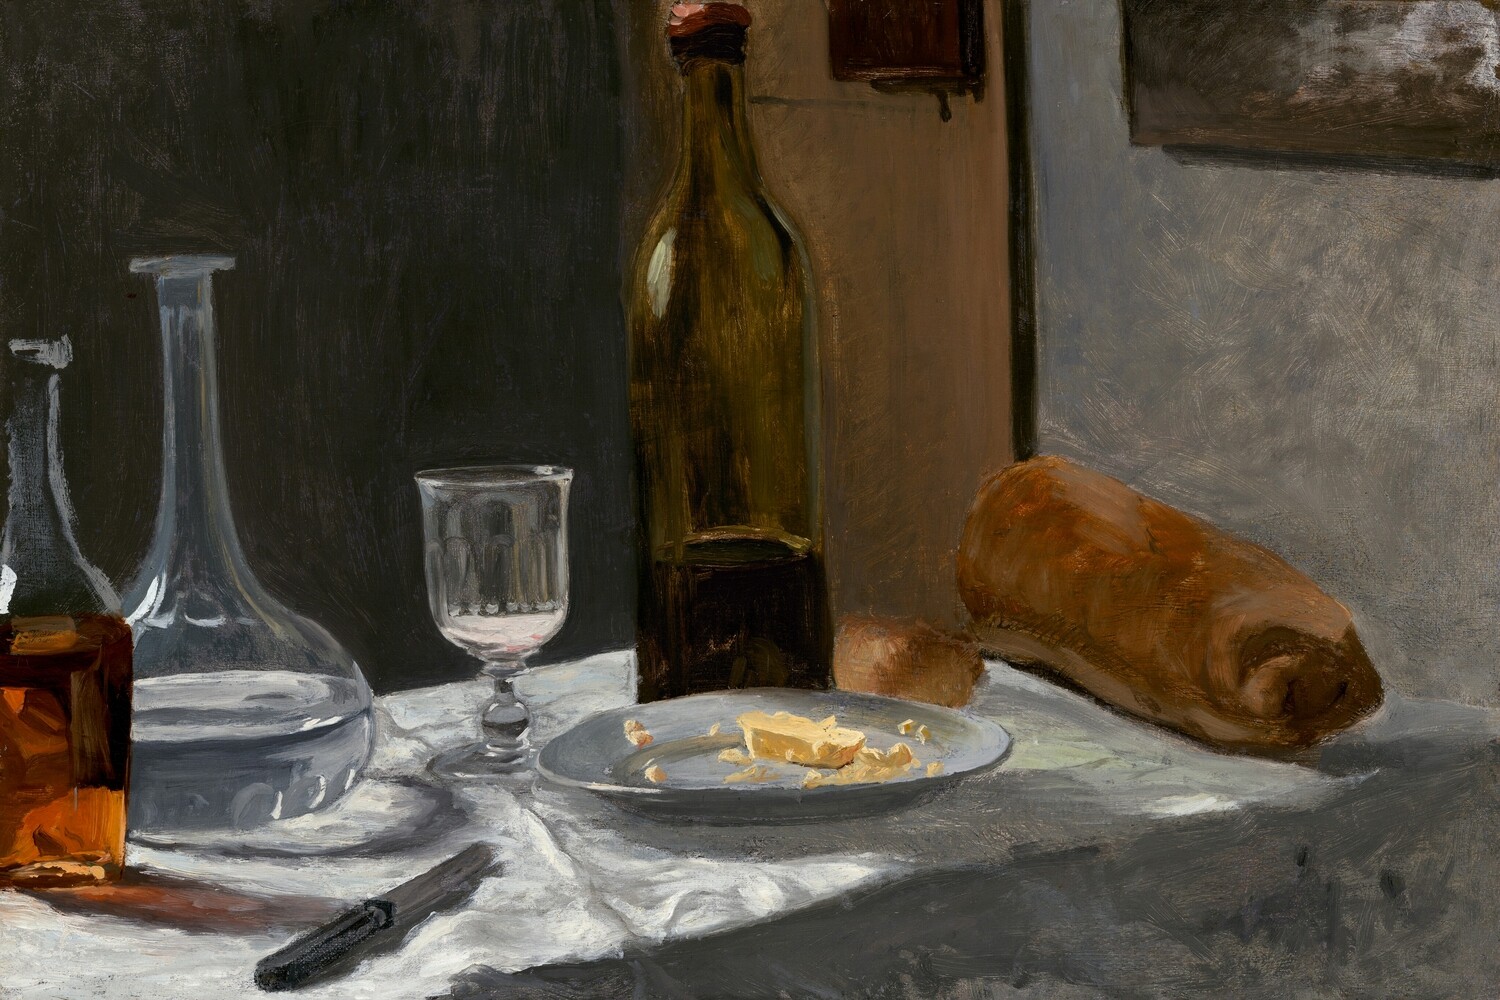 Claude Monet | Still life with bottle, carafe, bread, and wine 1862